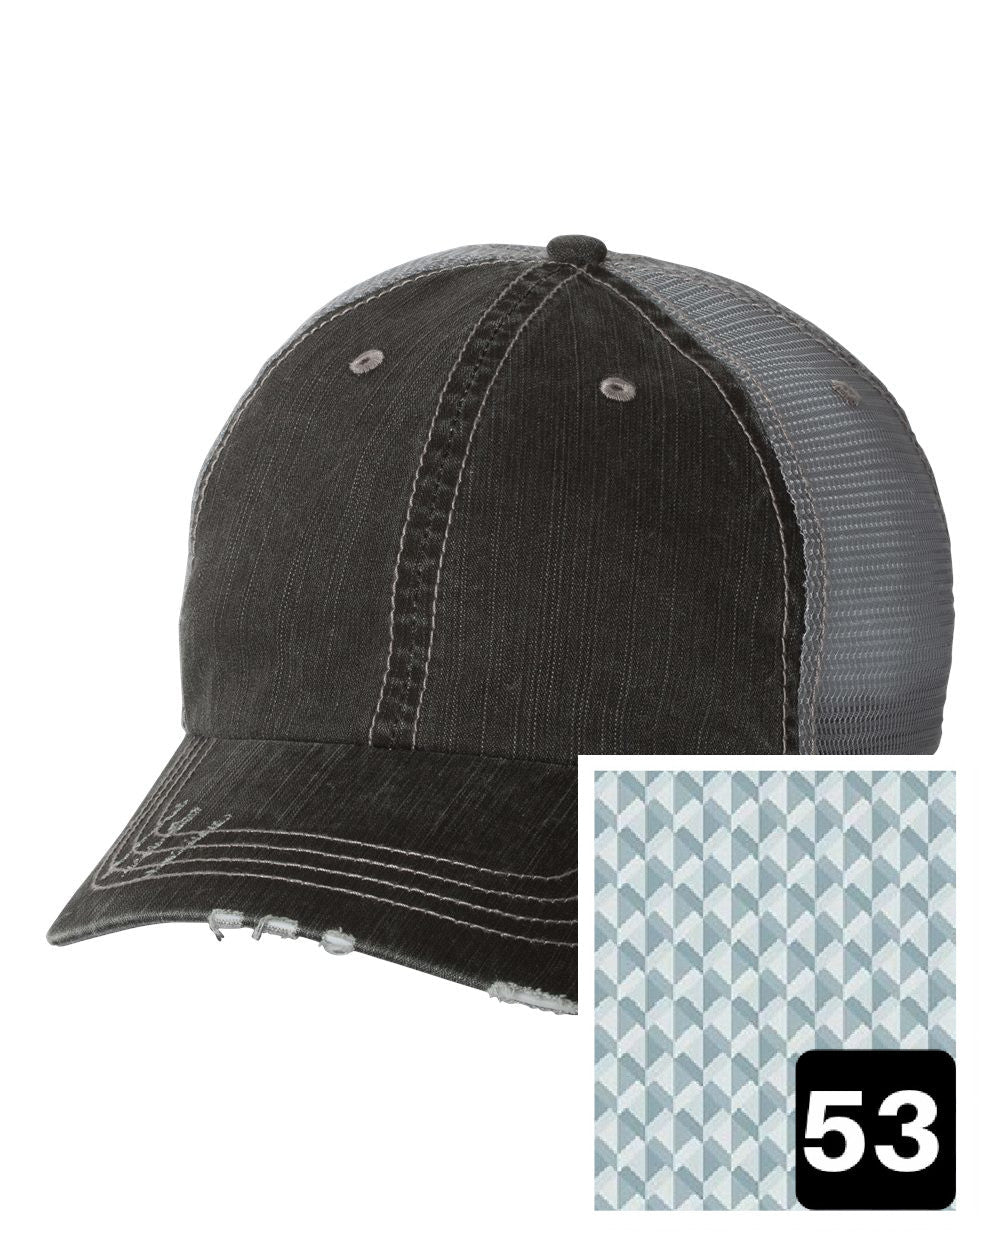 gray distressed trucker hat with multi-color stripe fabric state of Massachusetts